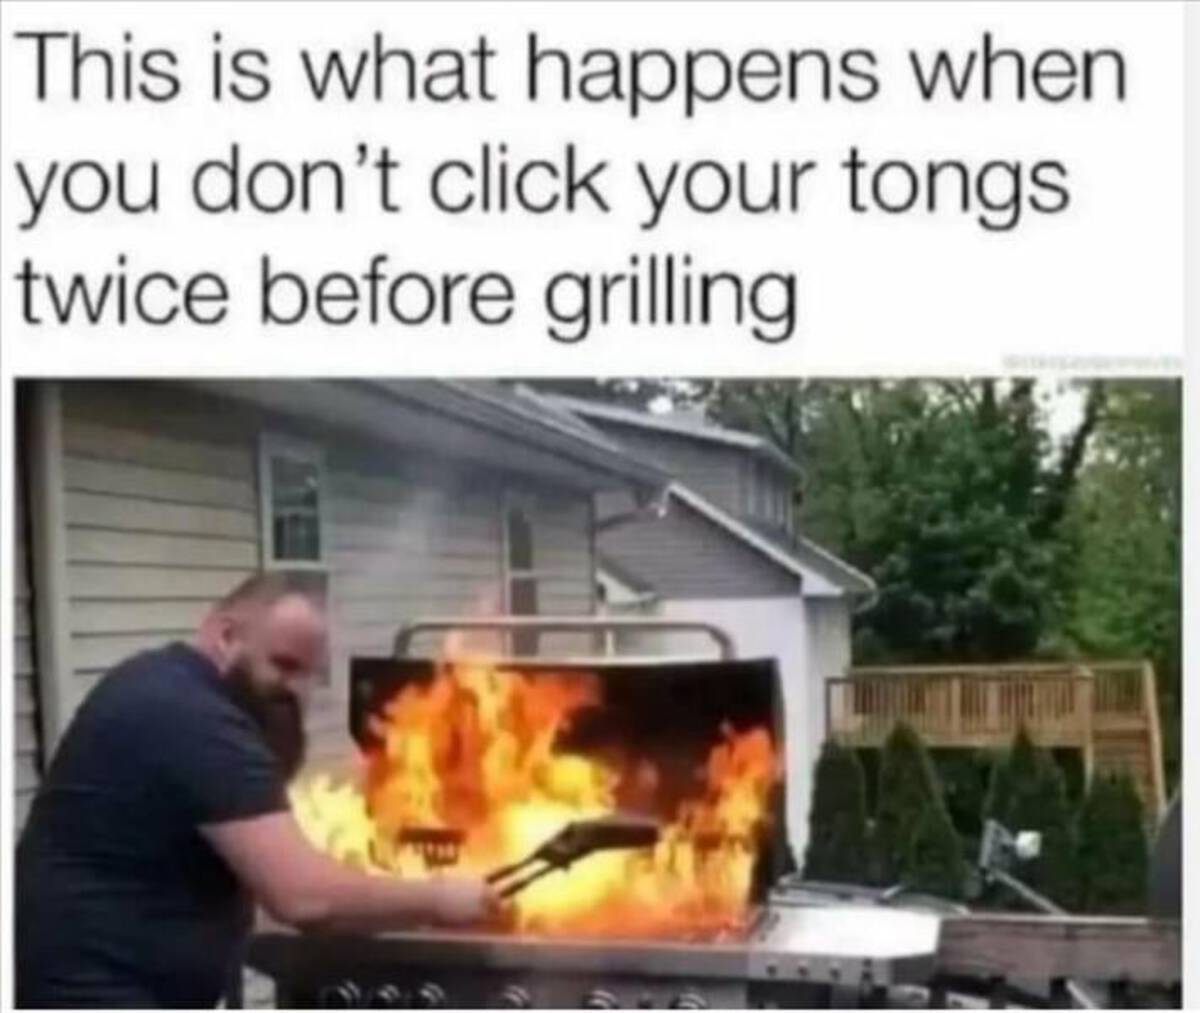 click tongs meme - This is what happens when you don't click your tongs twice before grilling